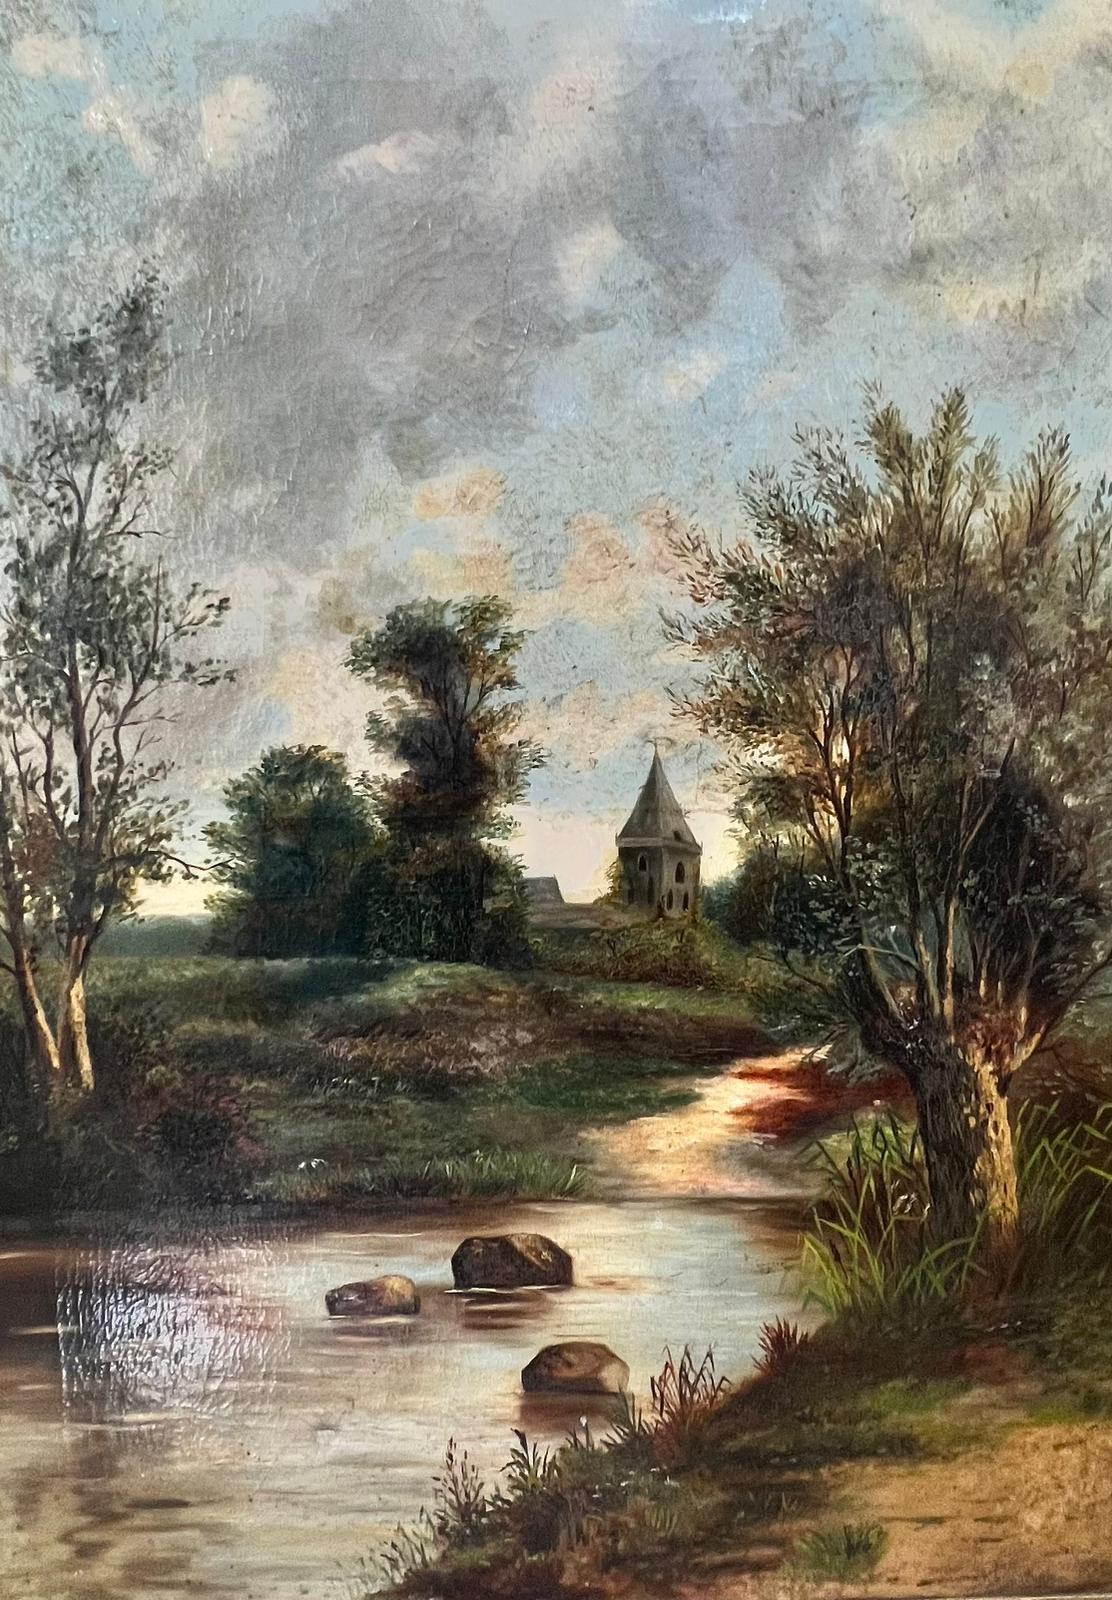 British Victorian Landscape Painting - 19th Century Rural Landscape Stream in Fields with Distant Church Gilt Frame